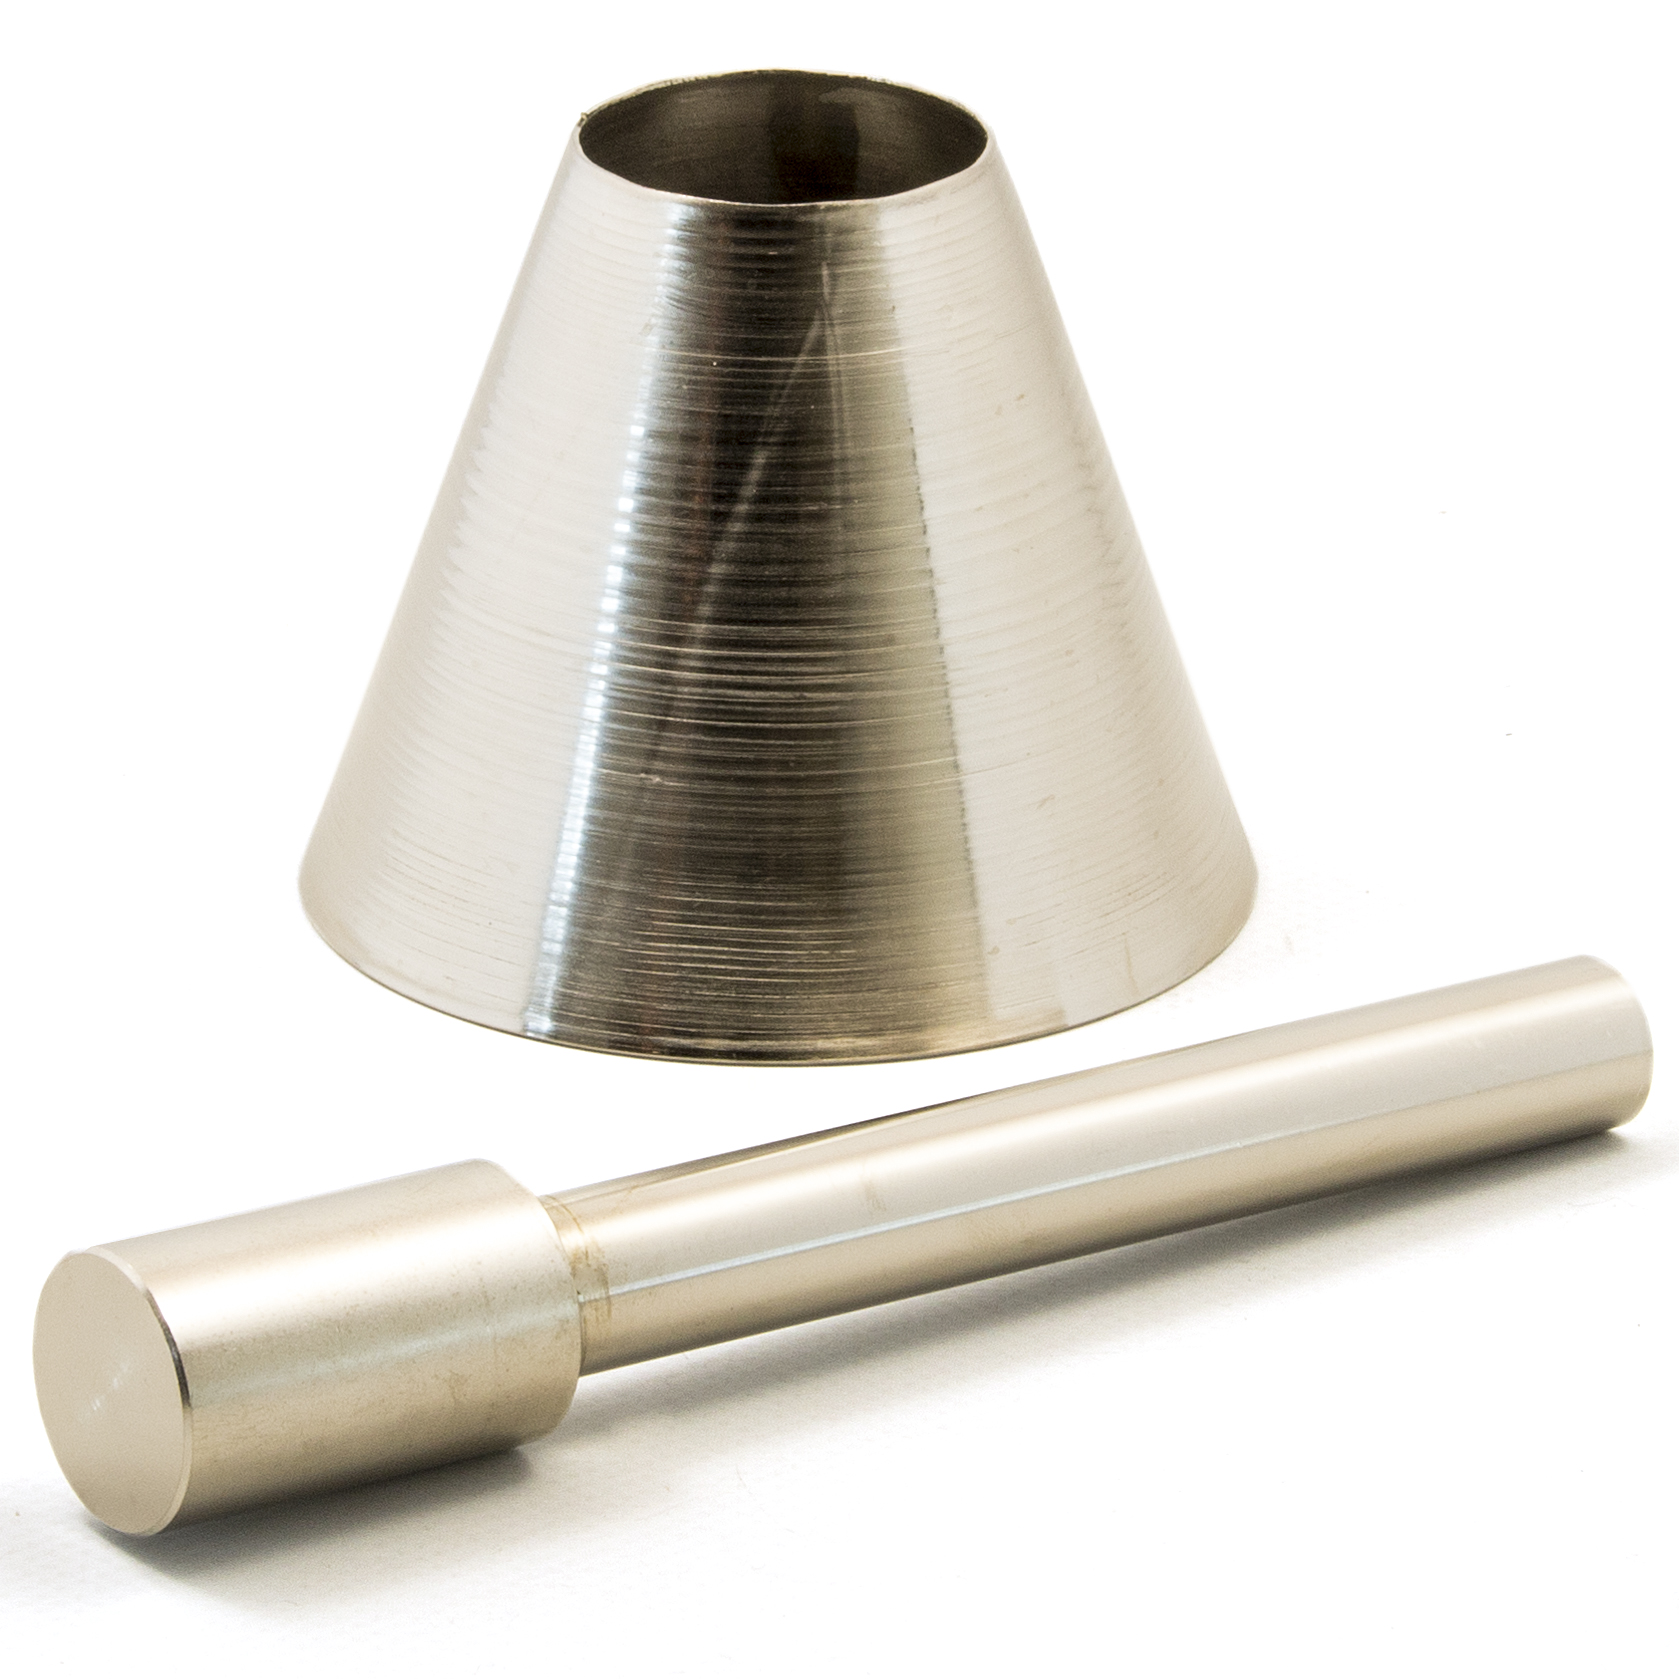 Sand absorption cone and tamper